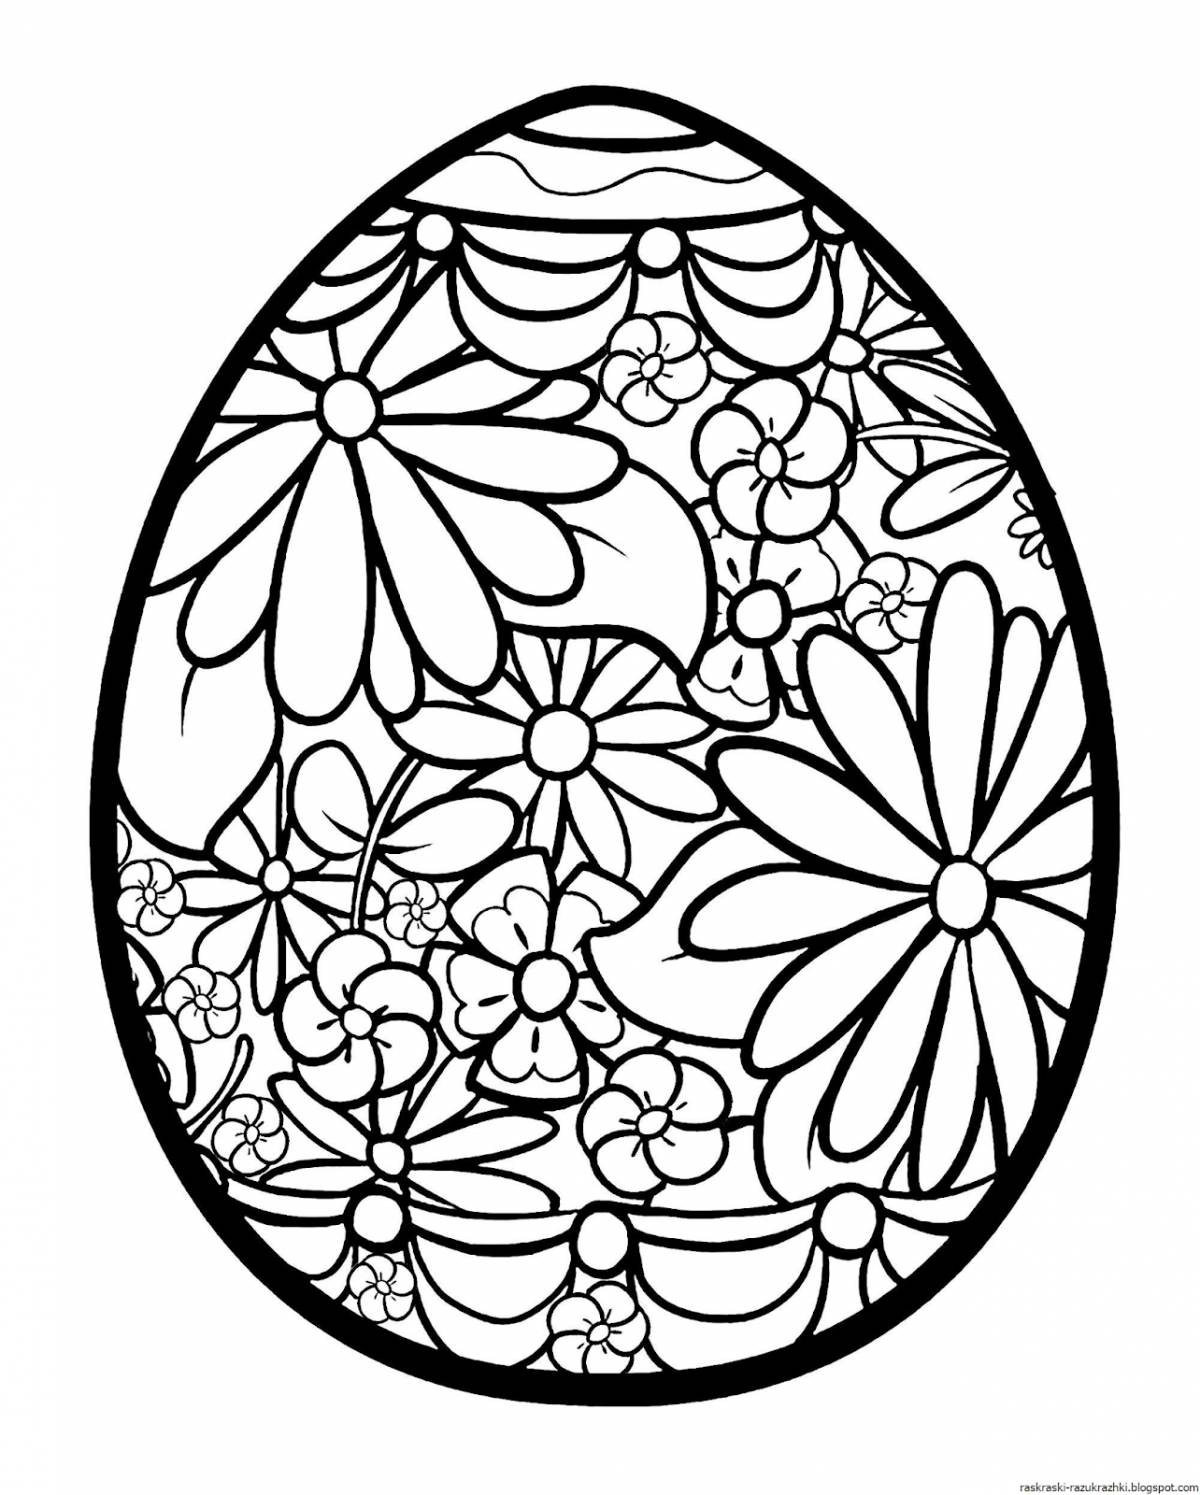 Sparkling Easter egg coloring page